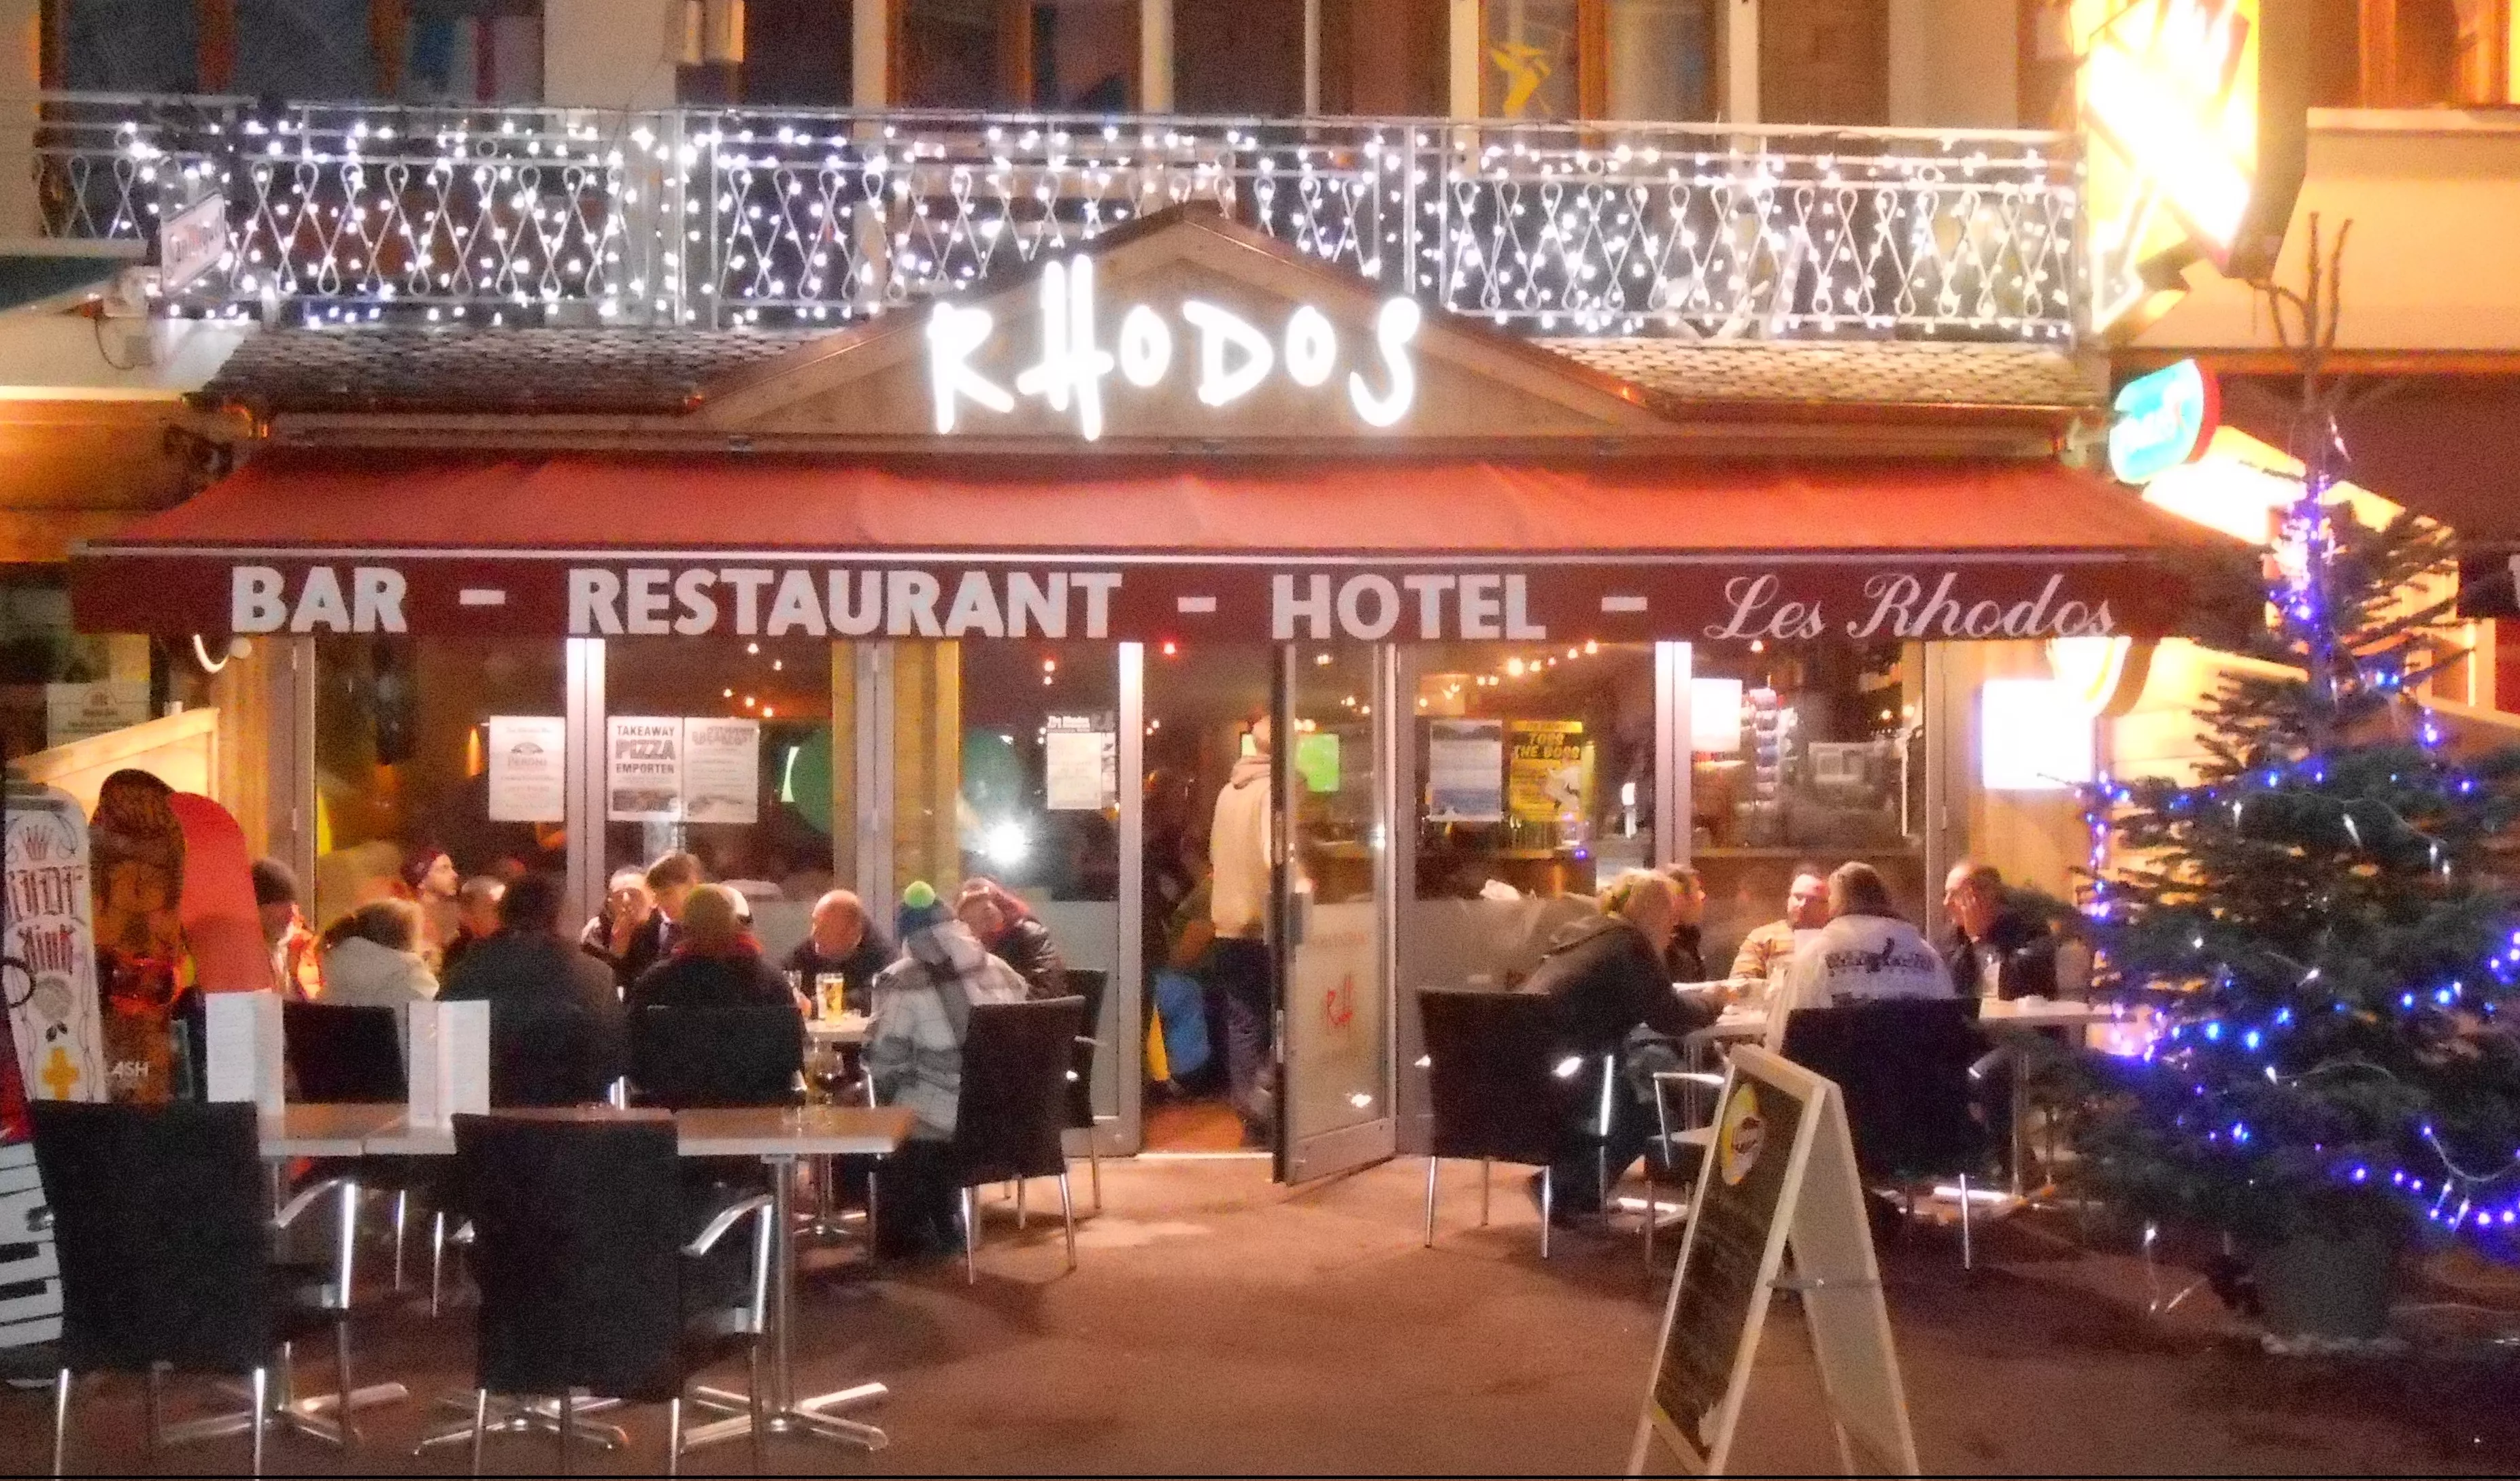 Les Rhodos Bar in France, Europe | Restaurants,Bars - Rated 0.8